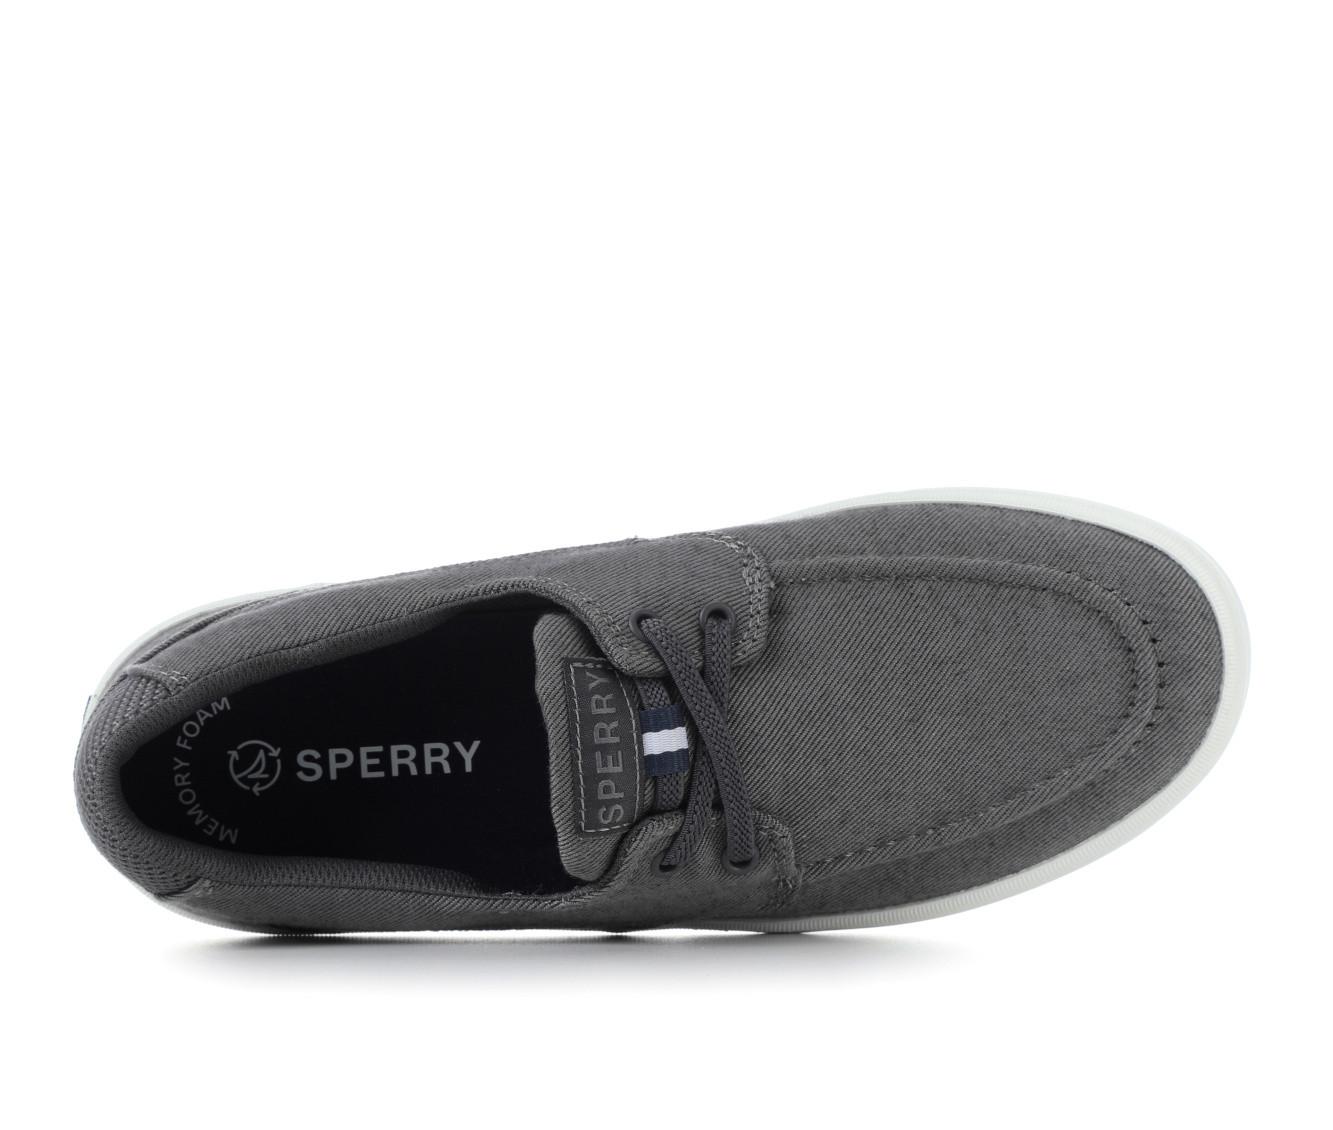 Men's Sperry Seacycled Bowery Dress Shoes